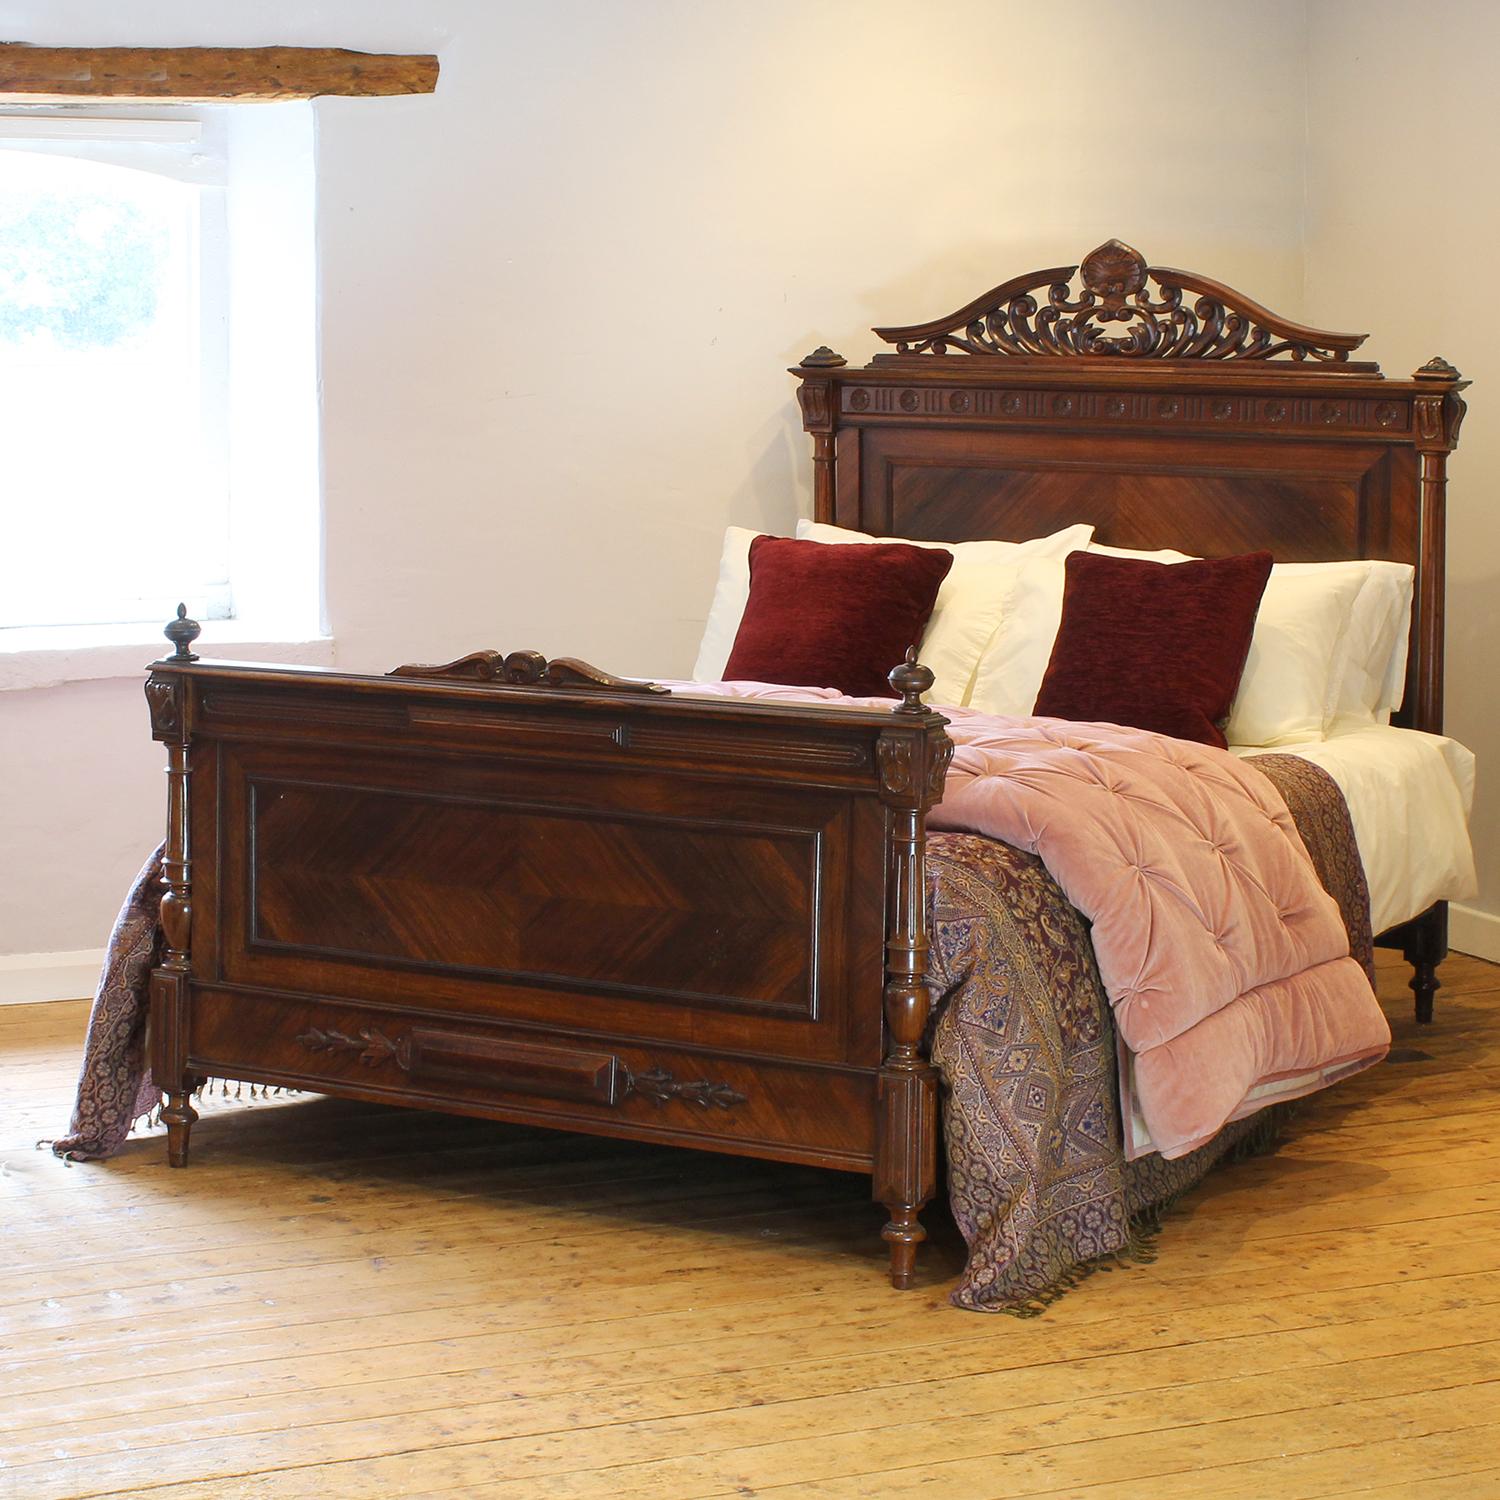 A fabulous style bedstead in dark walnut with decoratively carved pediment and turned posts.

This bed accepts a British king size or American queen size, 5ft wide (60 inches or 150cm) base and mattress set.

The price includes a deep firm bed